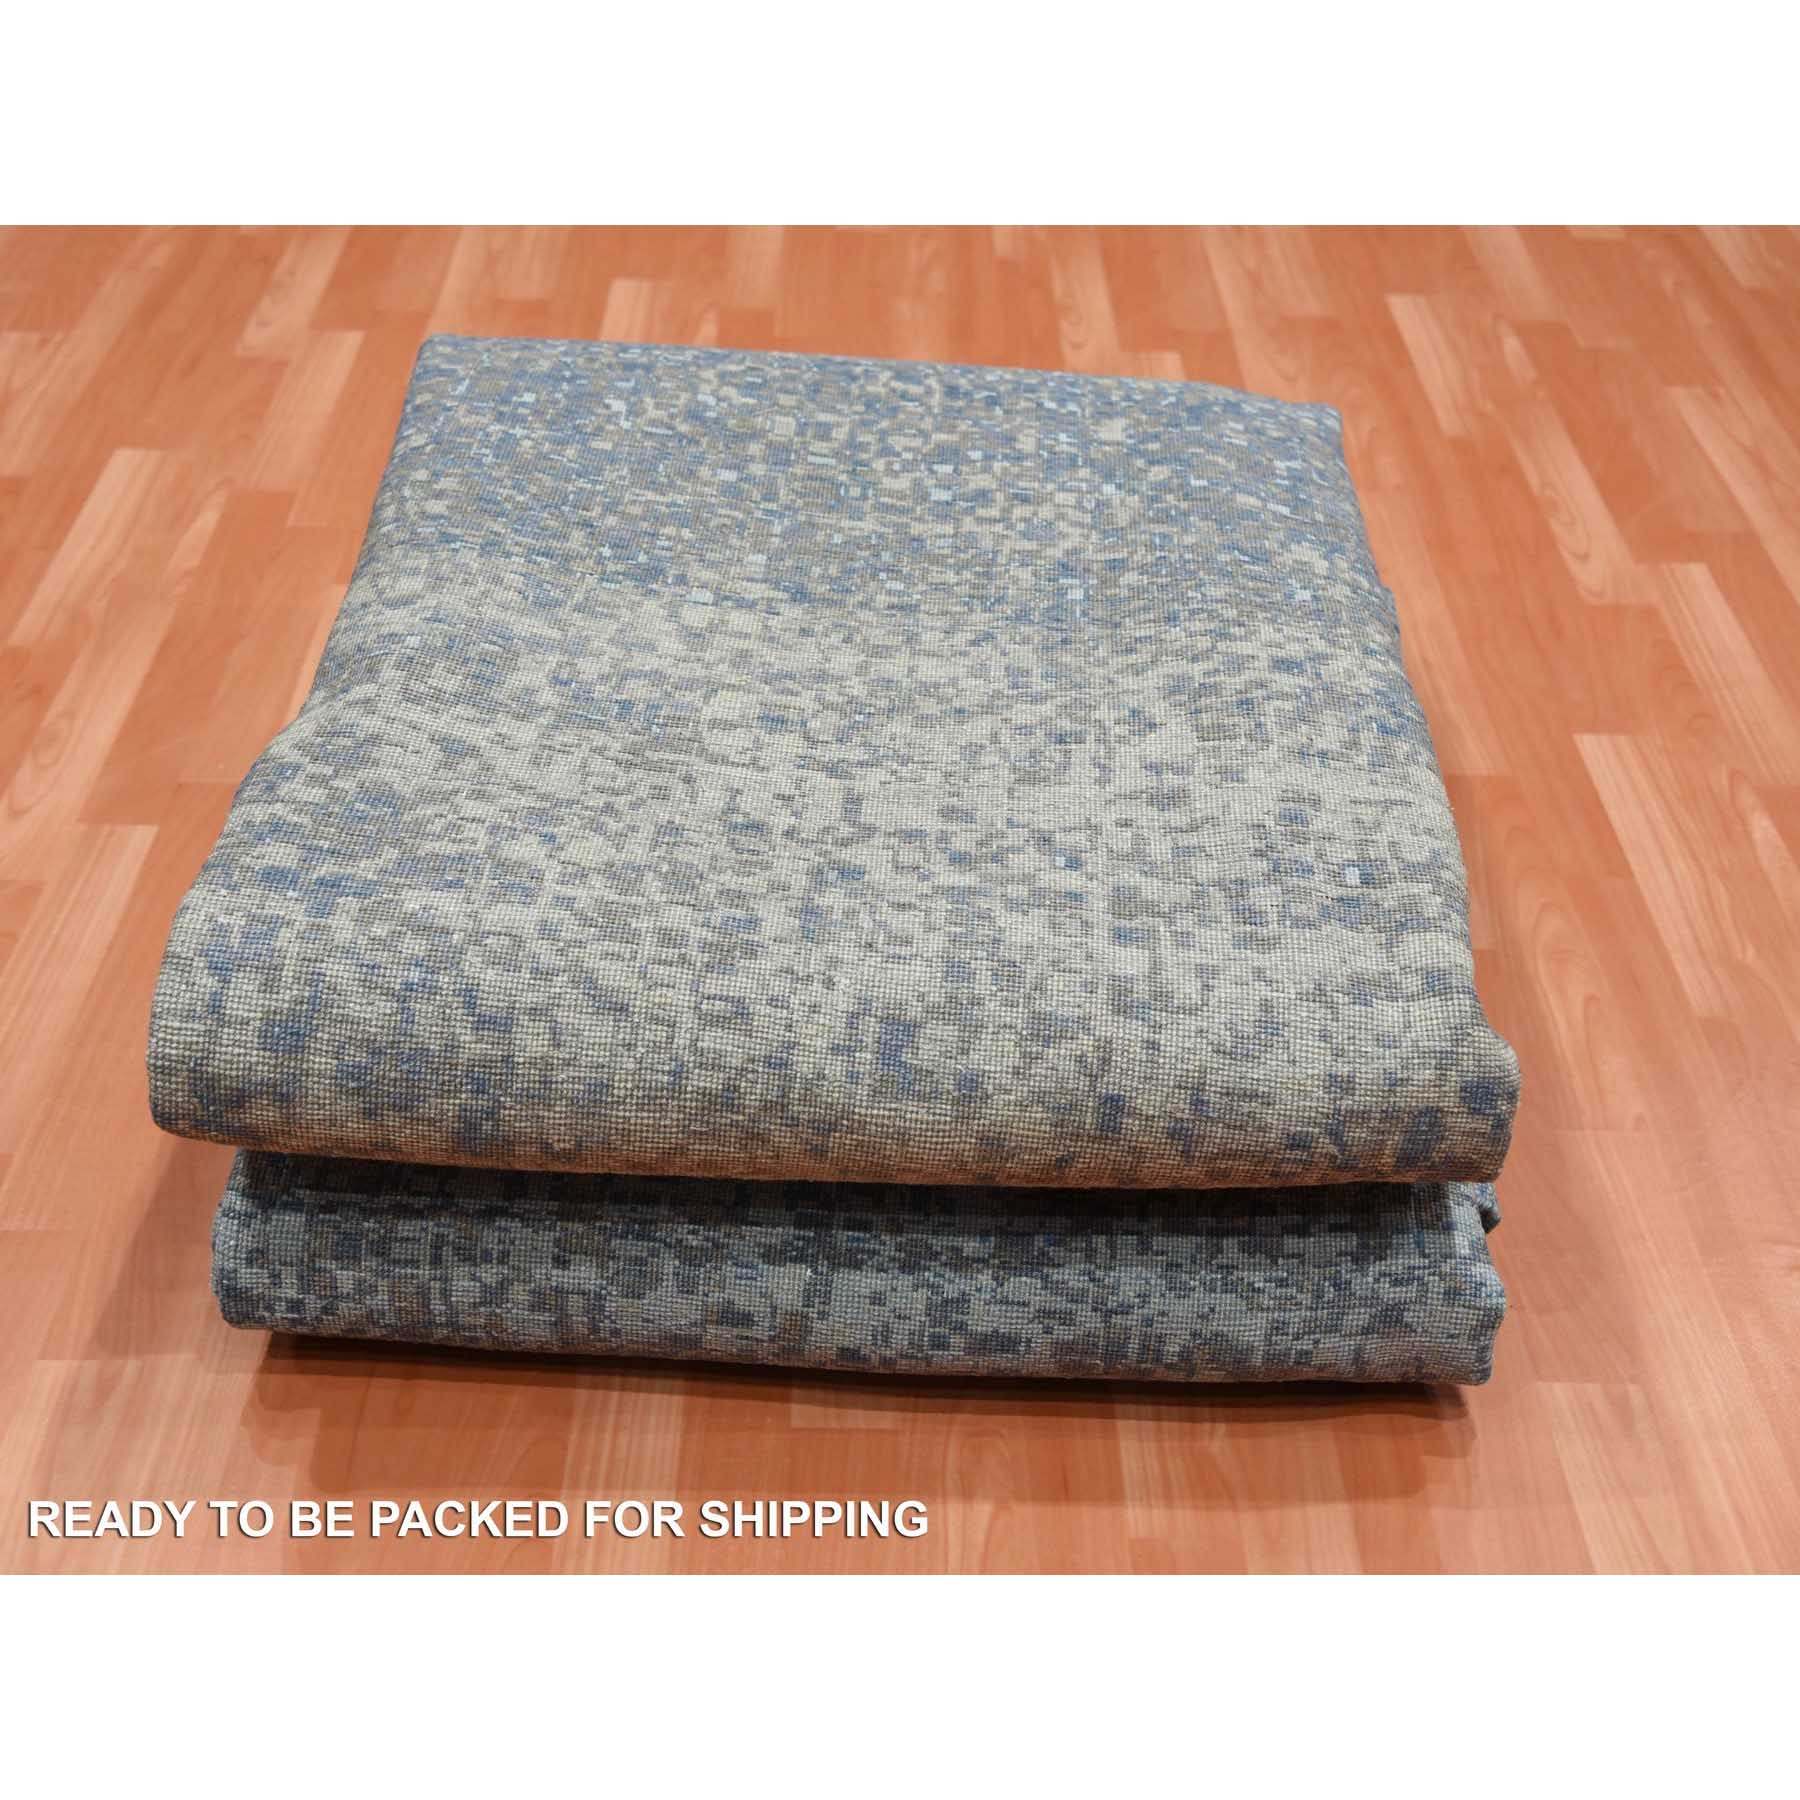 Modern-and-Contemporary-Hand-Knotted-Rug-375505